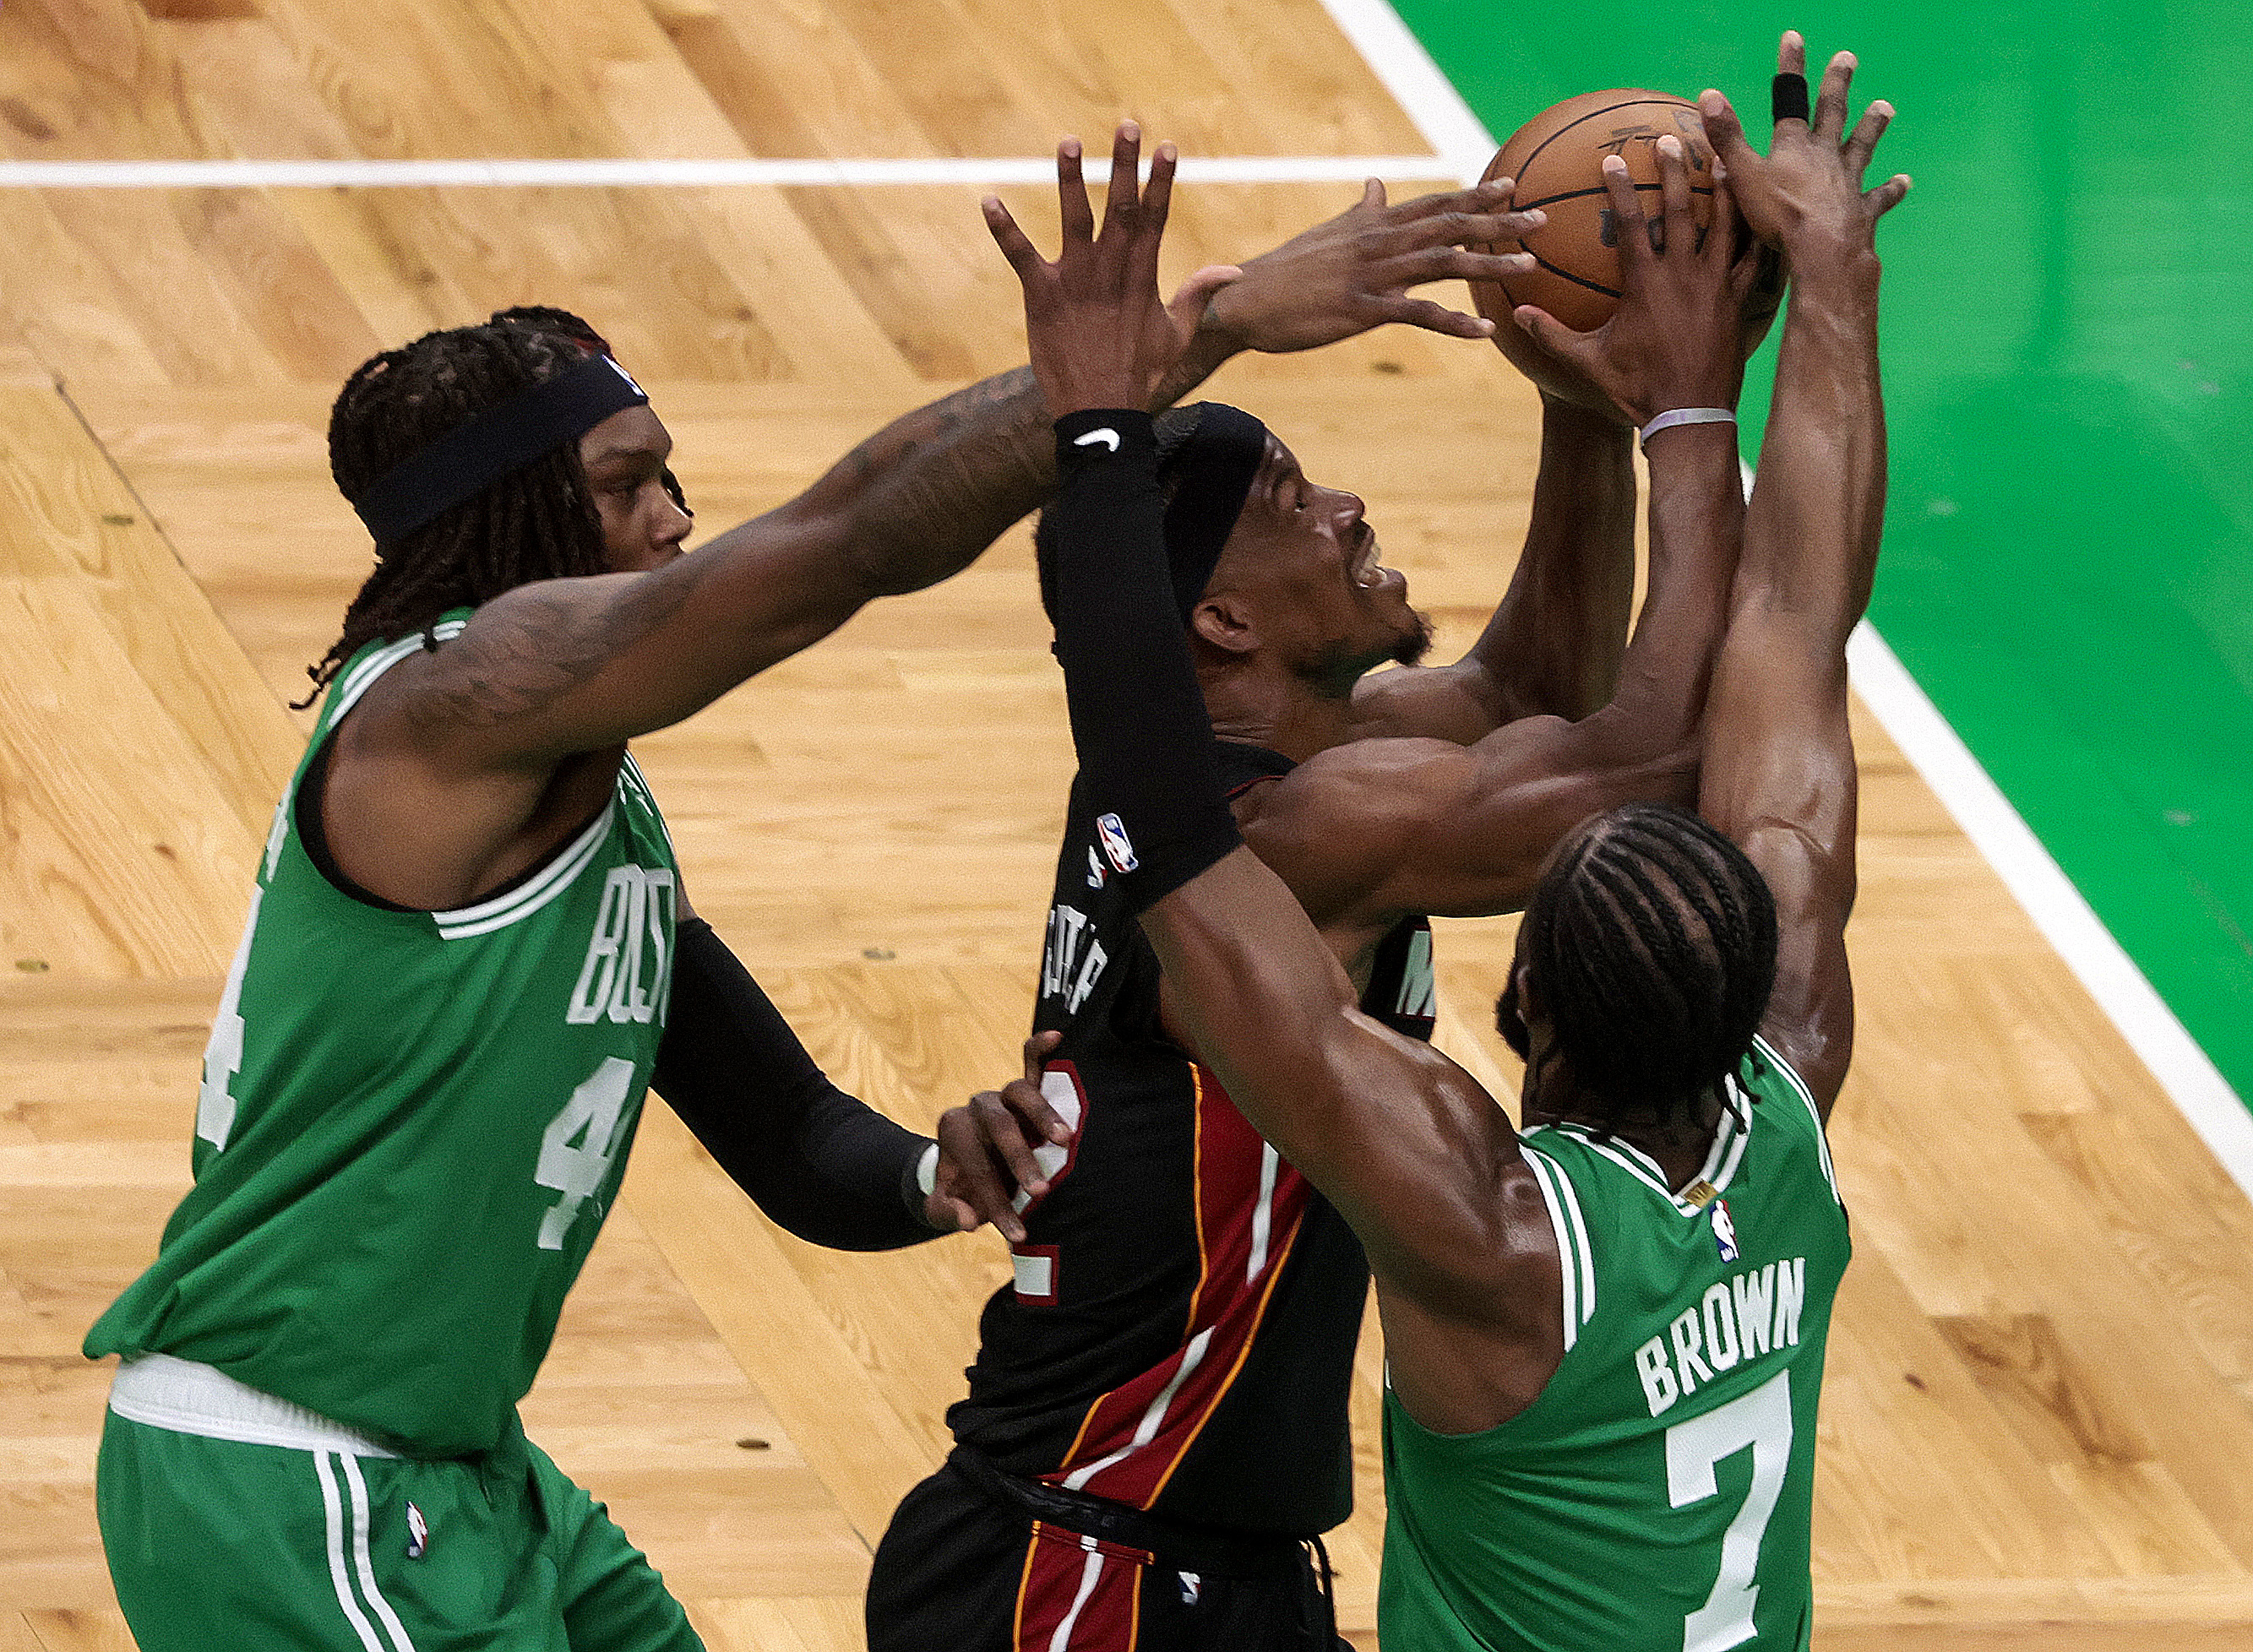 Heat-Celtics Game 7 Is TNT's Most-Watched NBA ECF Game Ever